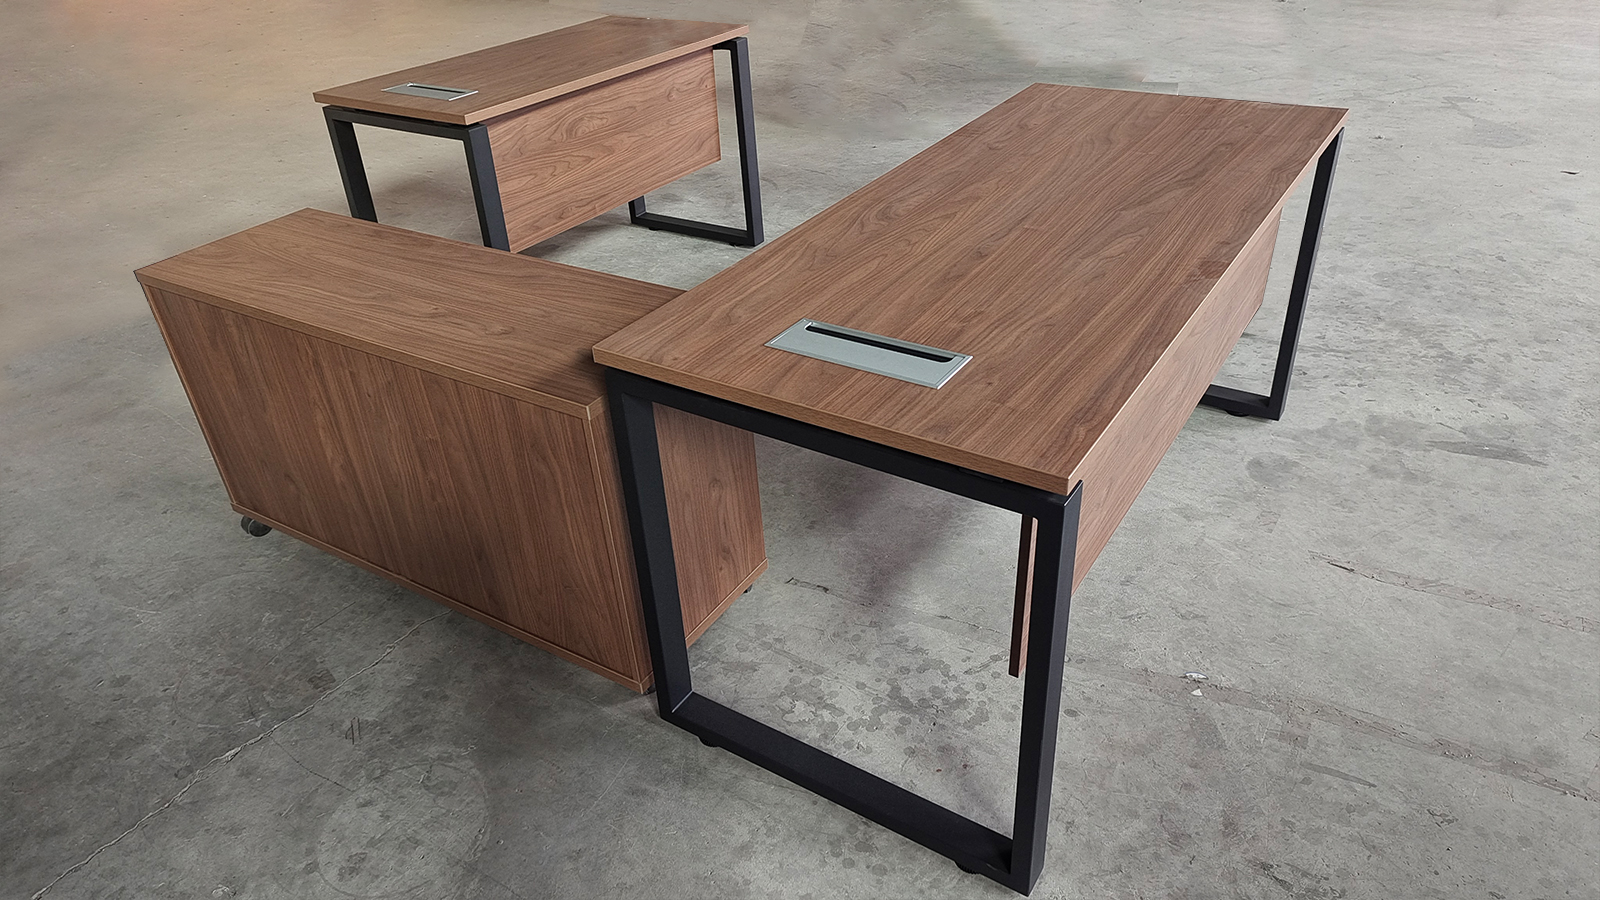 The Process of Making An Office Desk From Xusheng Office